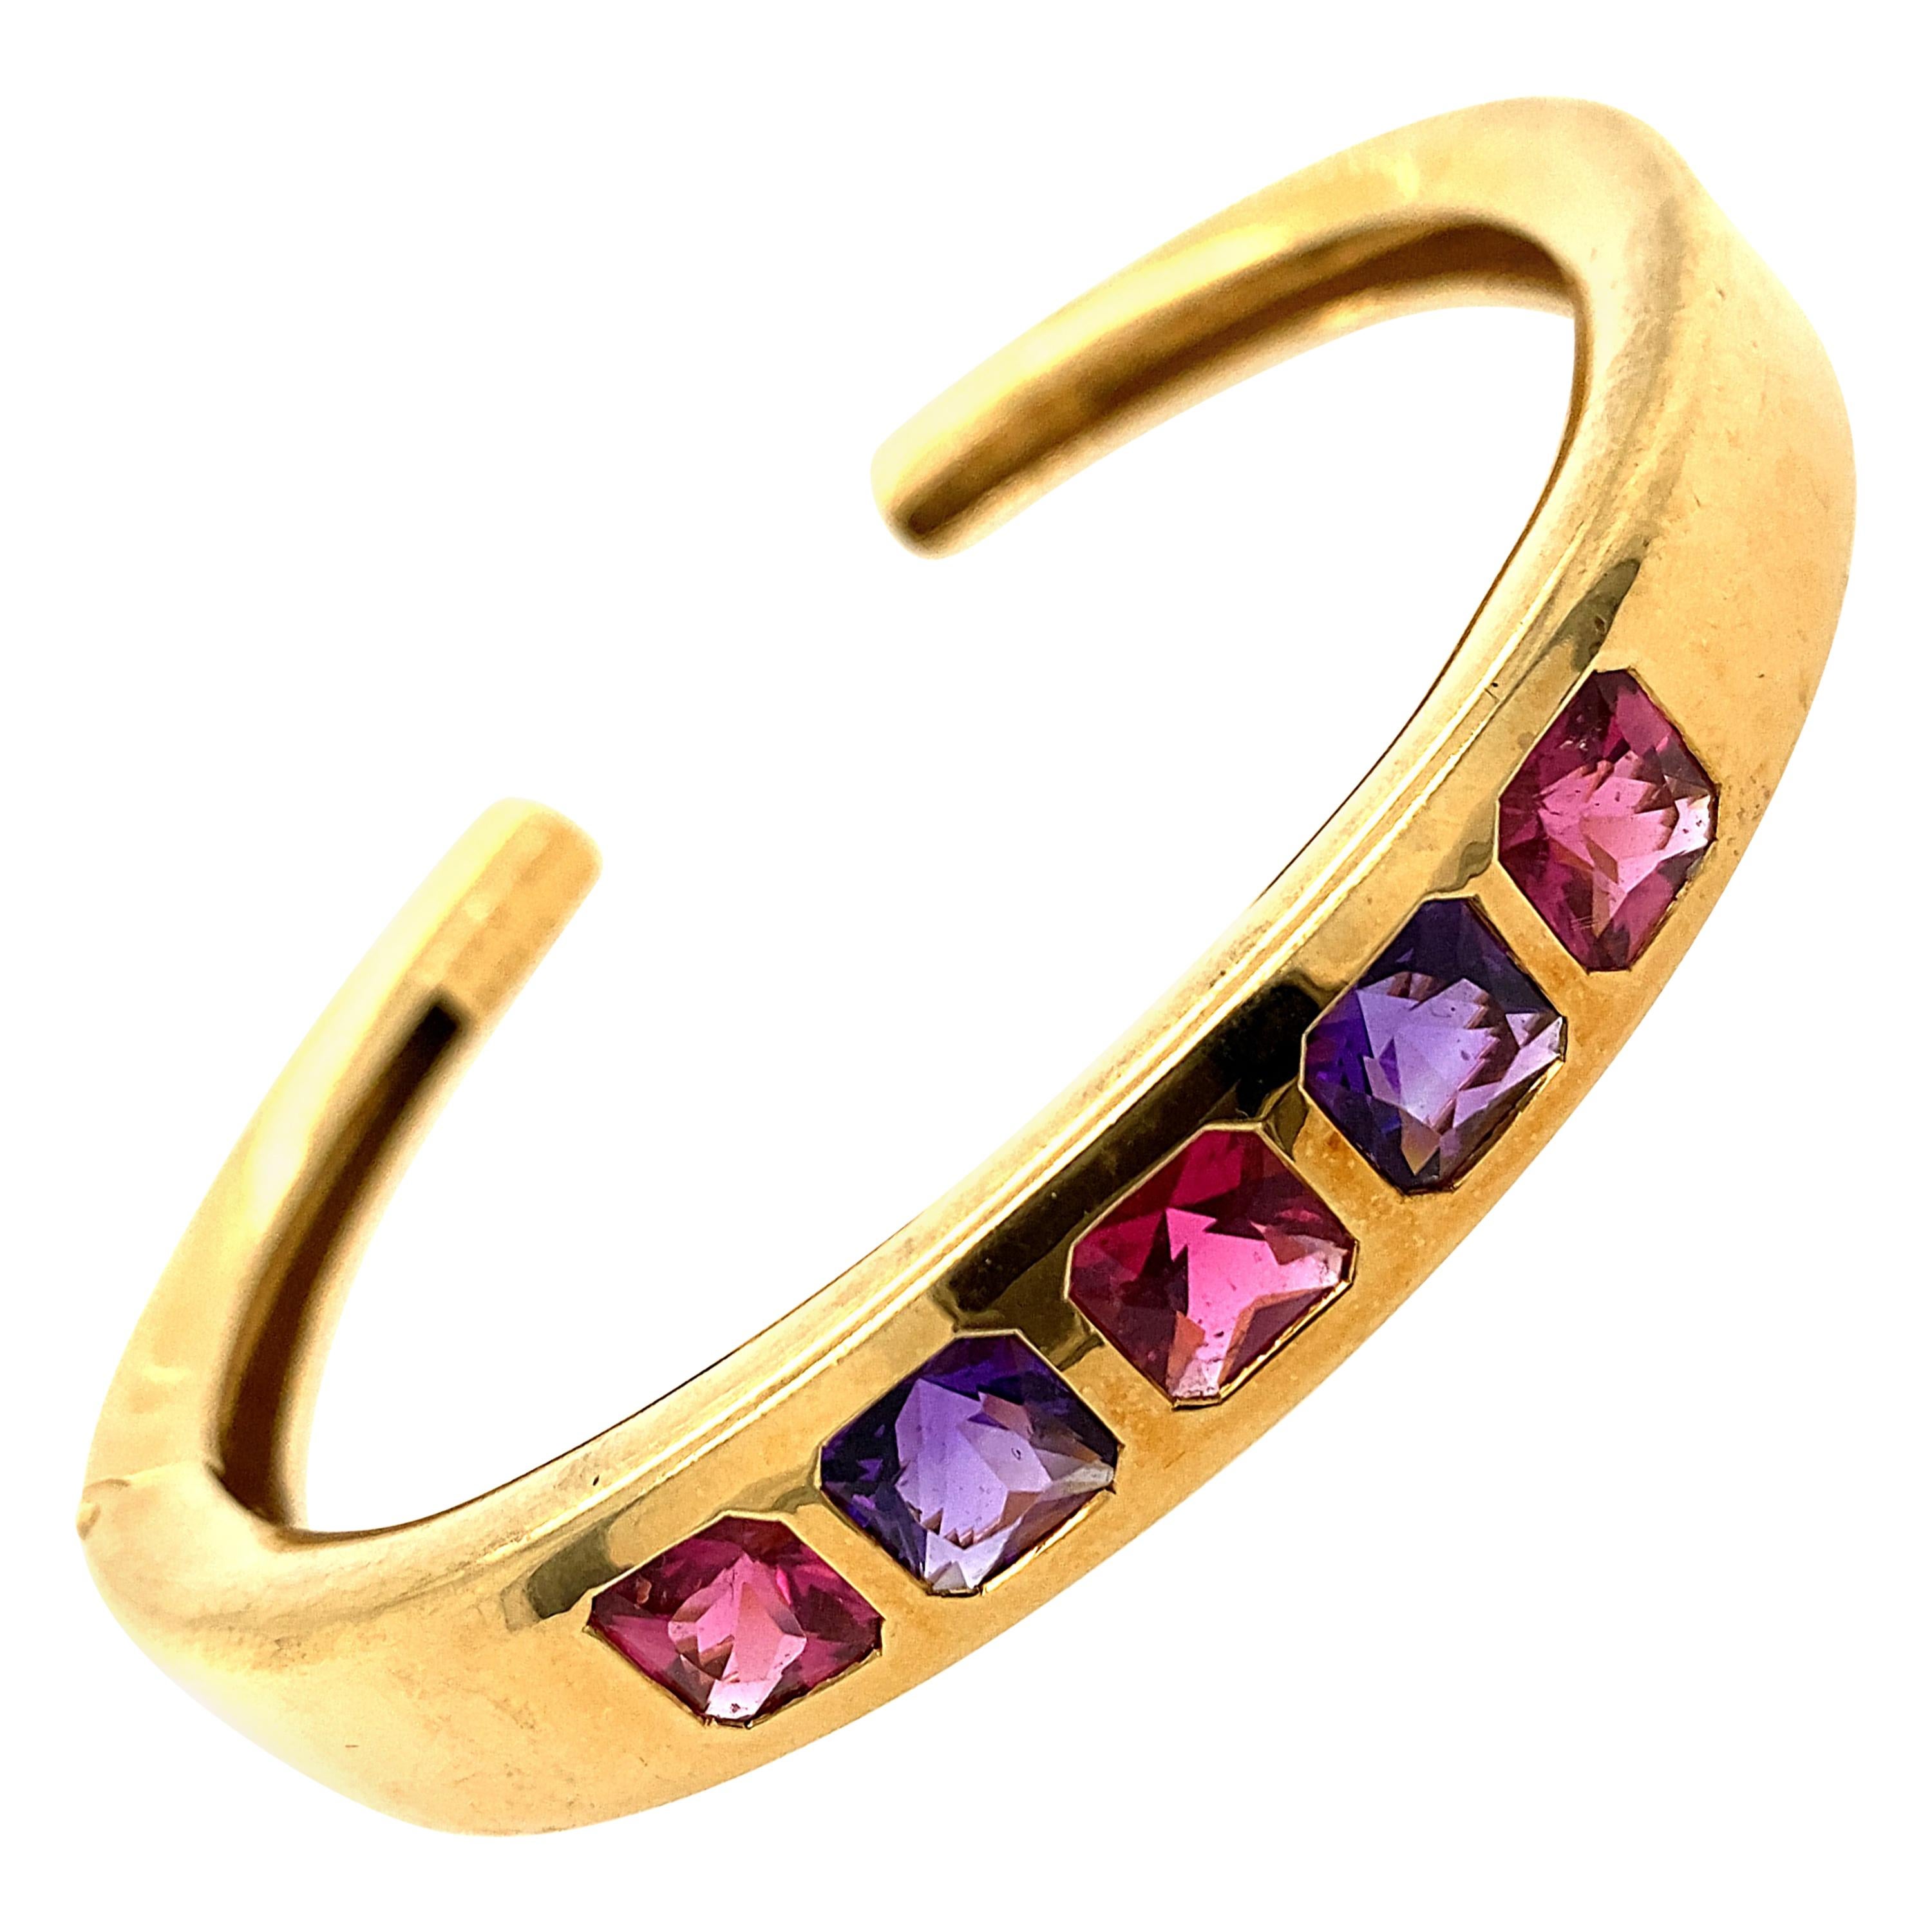 Van Cleef & Arpels 18k Yellow Gold Bracelet with Pink Tourmaline and Amethyst